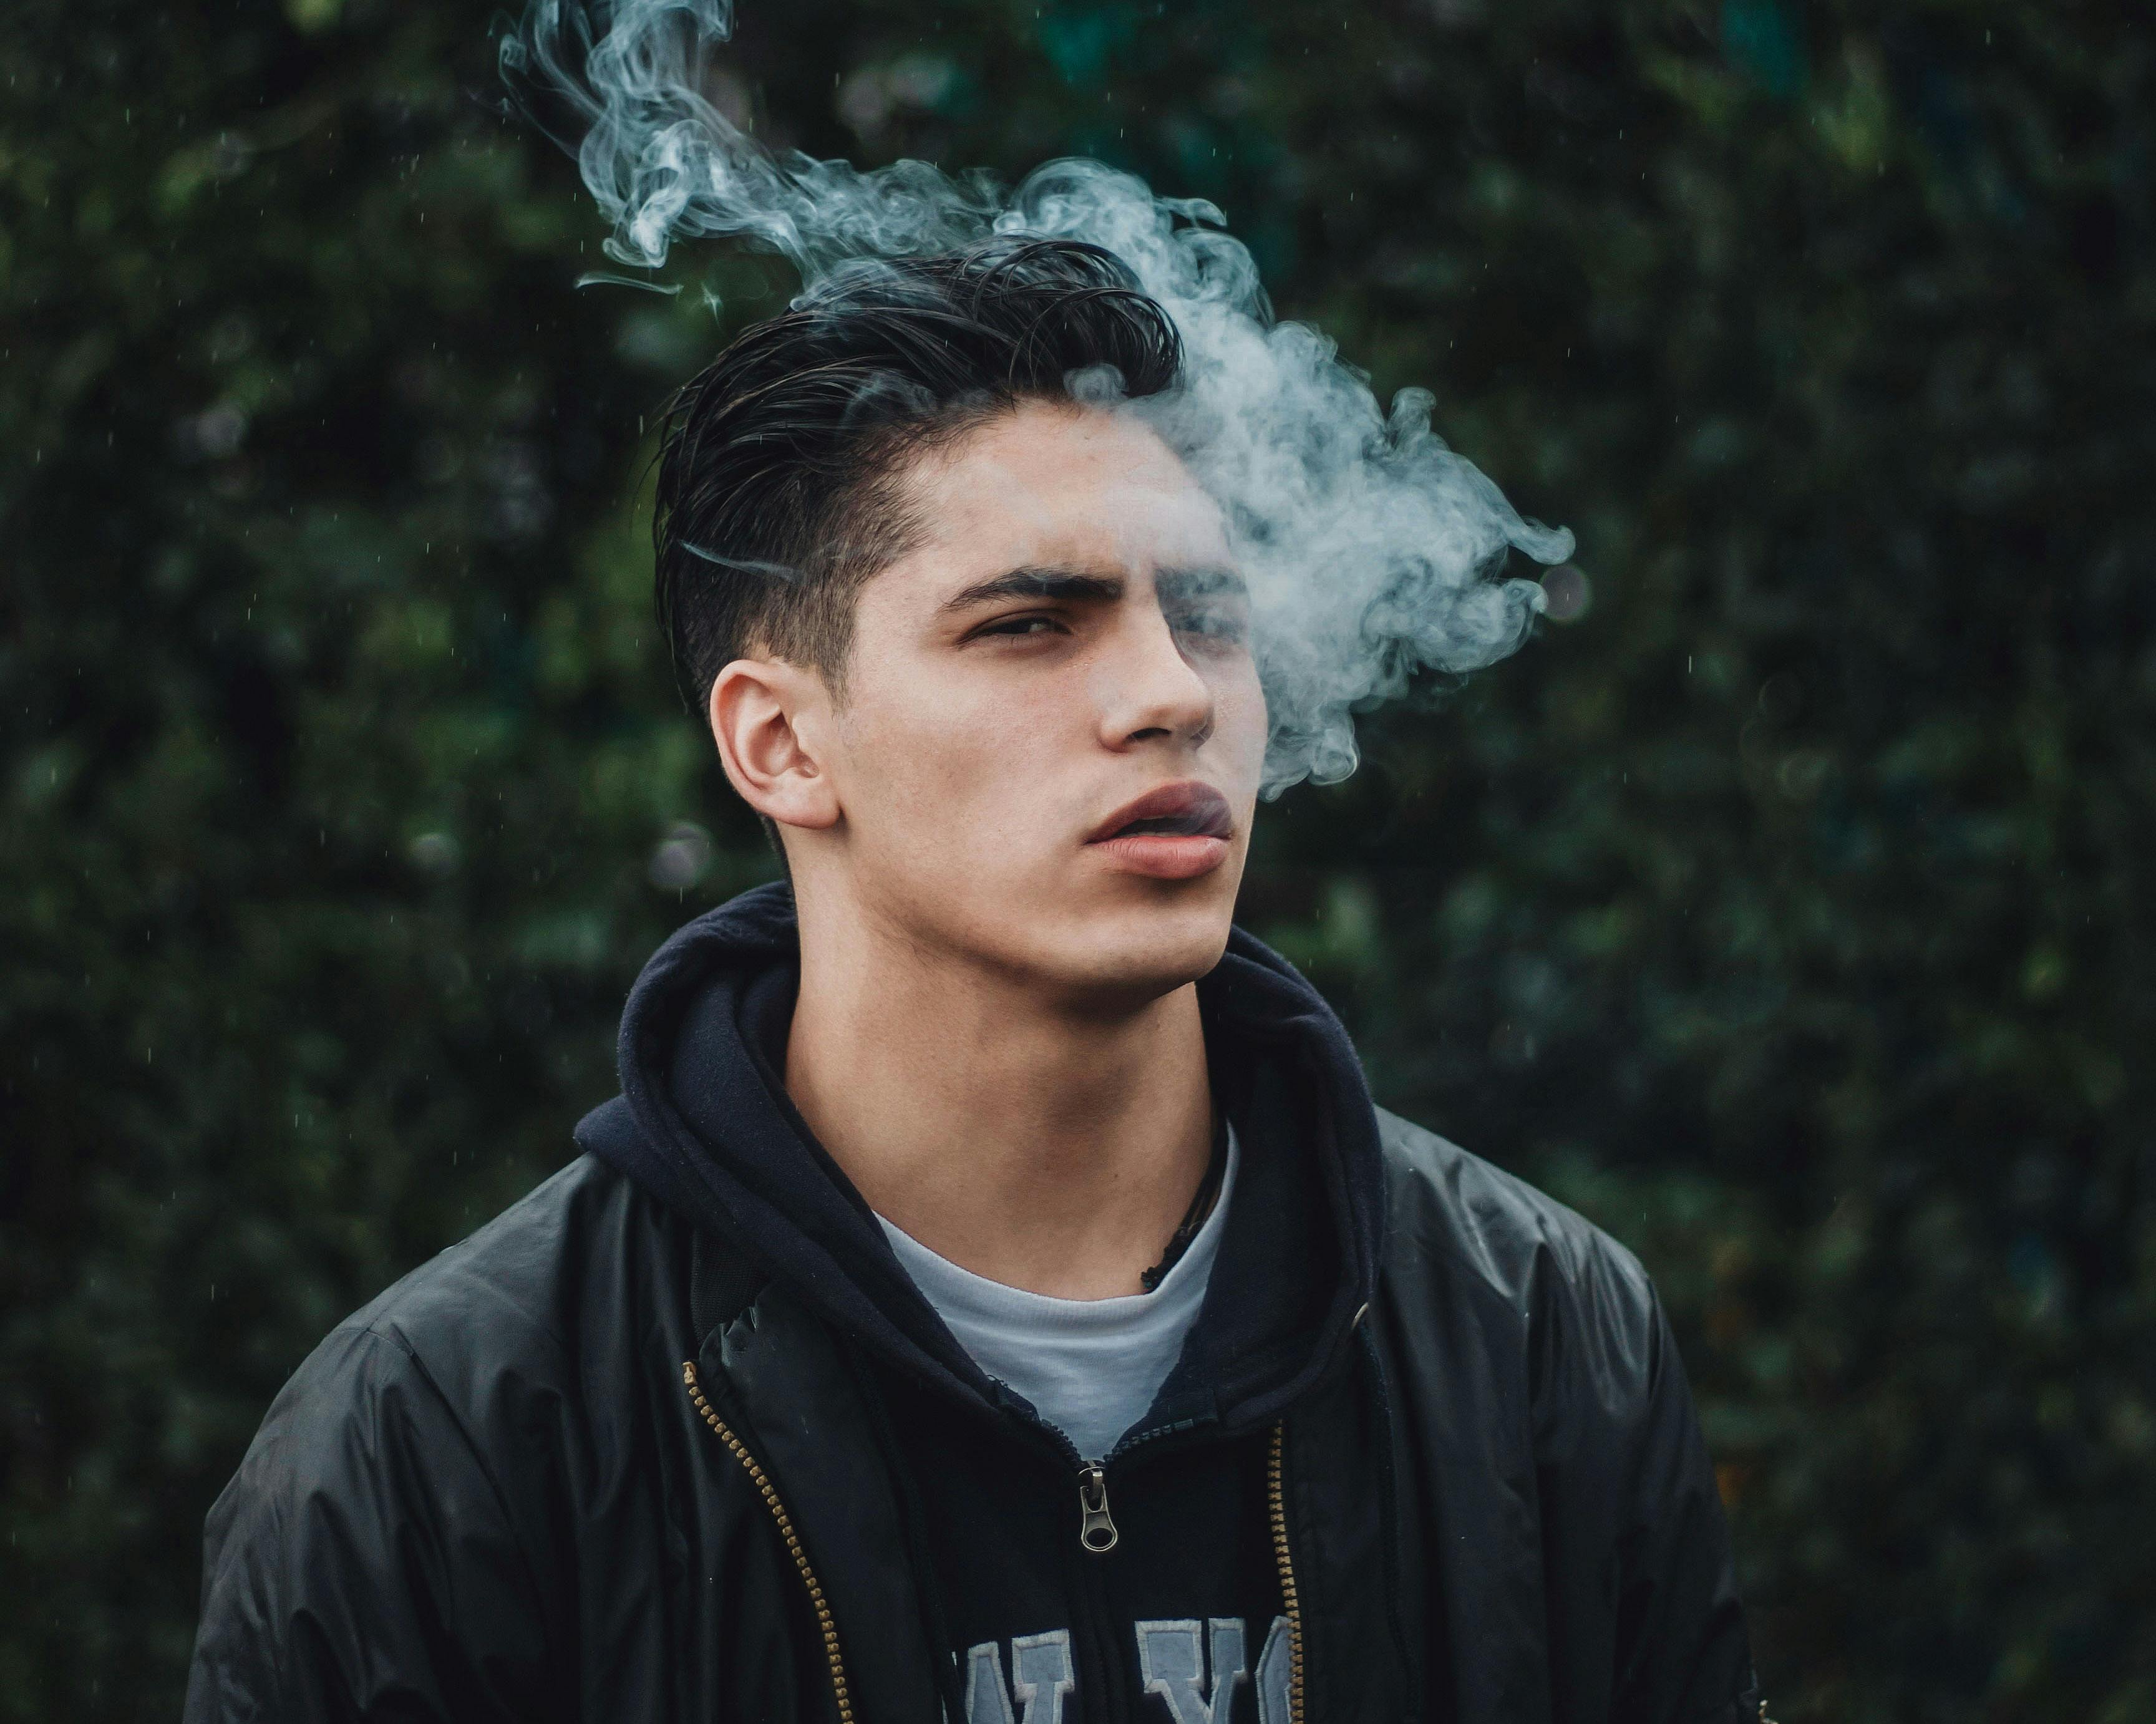 In this article, we feature the best cannabis strains for ADHD. Here, a man is shown exhaling smoke